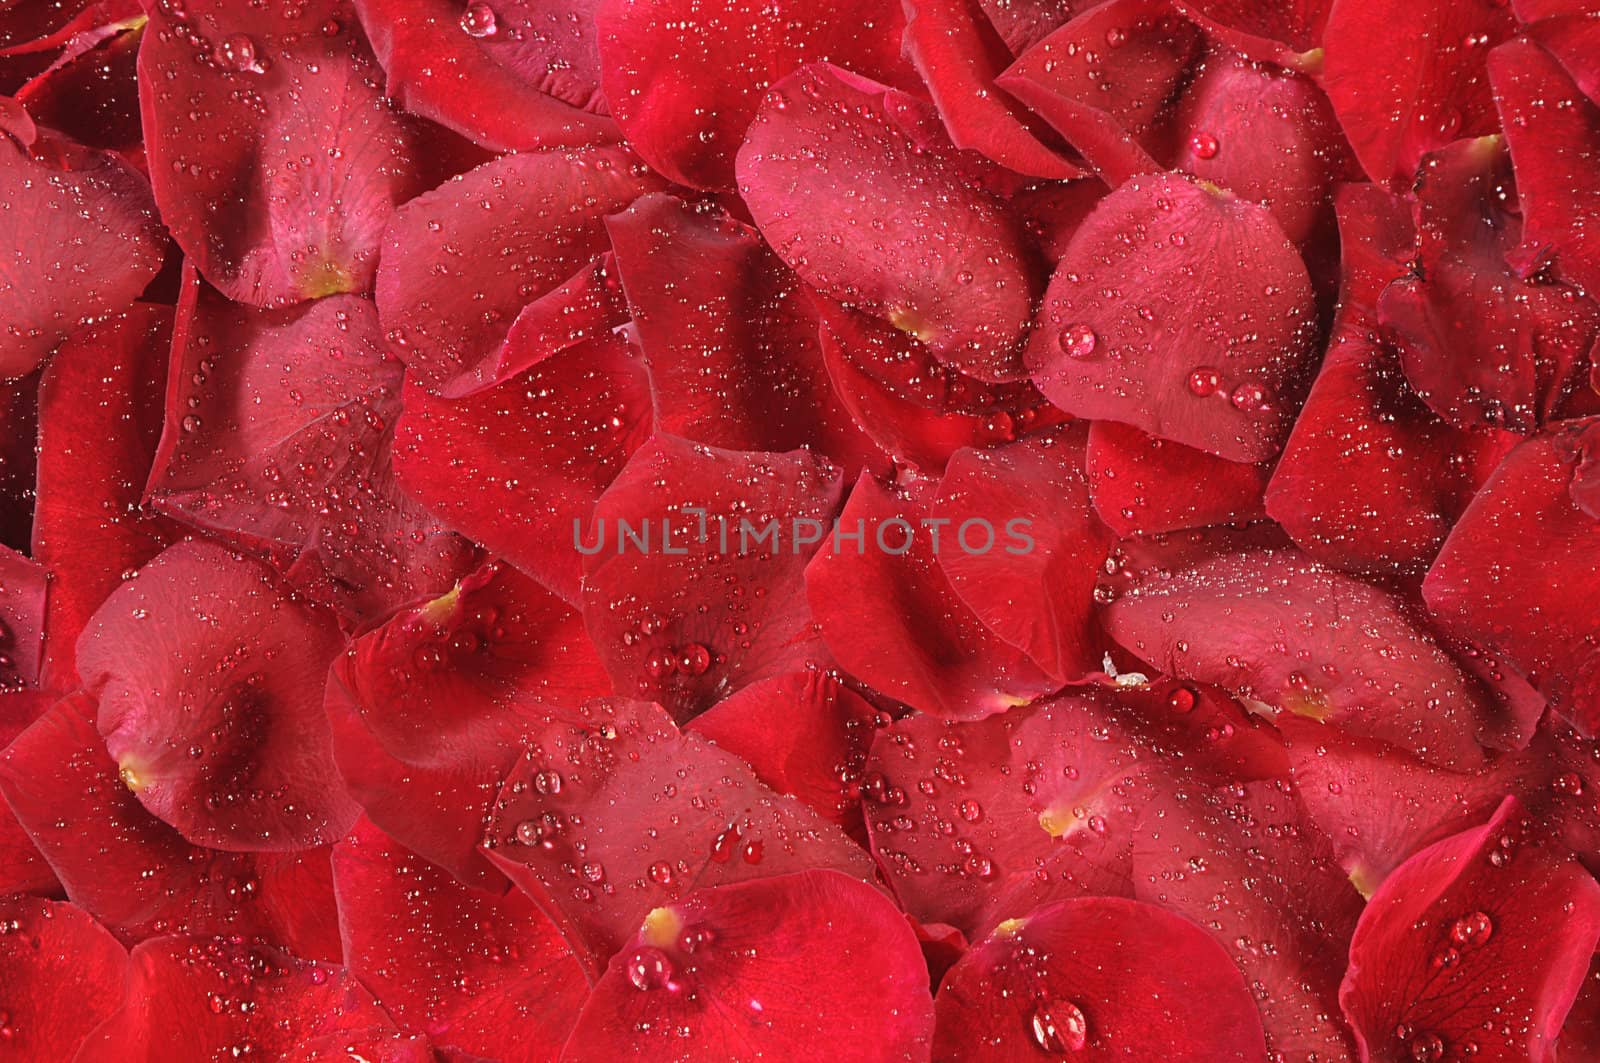 petals of roses are in drops by dyoma